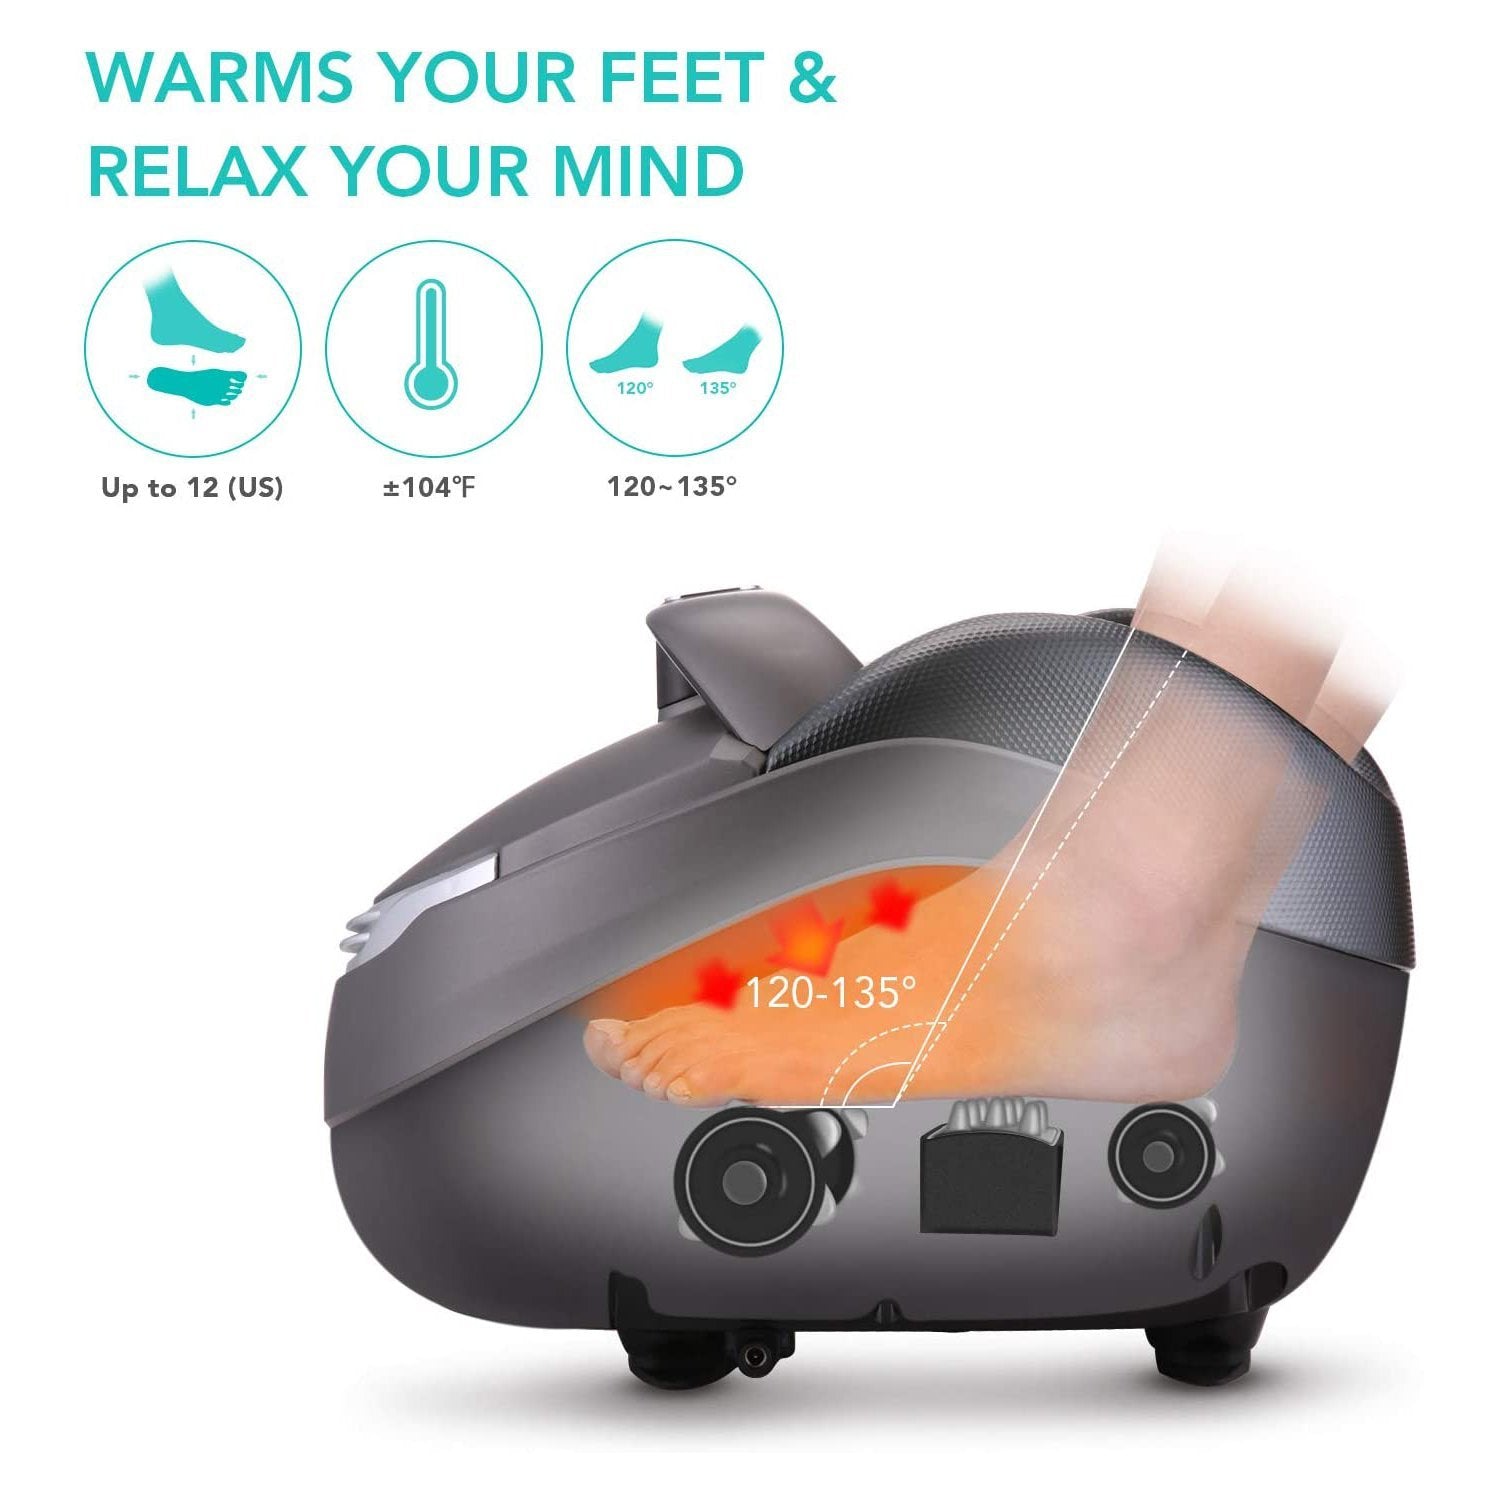 Load image into Gallery viewer, Naipo Foot Massager Shiatsu Foot Massage Machine Luxury Feet Massager Deep Kneading Massage with Tapping, Rolling, Air Compression, Heat and Adjustable Intensity Scraping for Plantar Fasciitis - NAIPO
